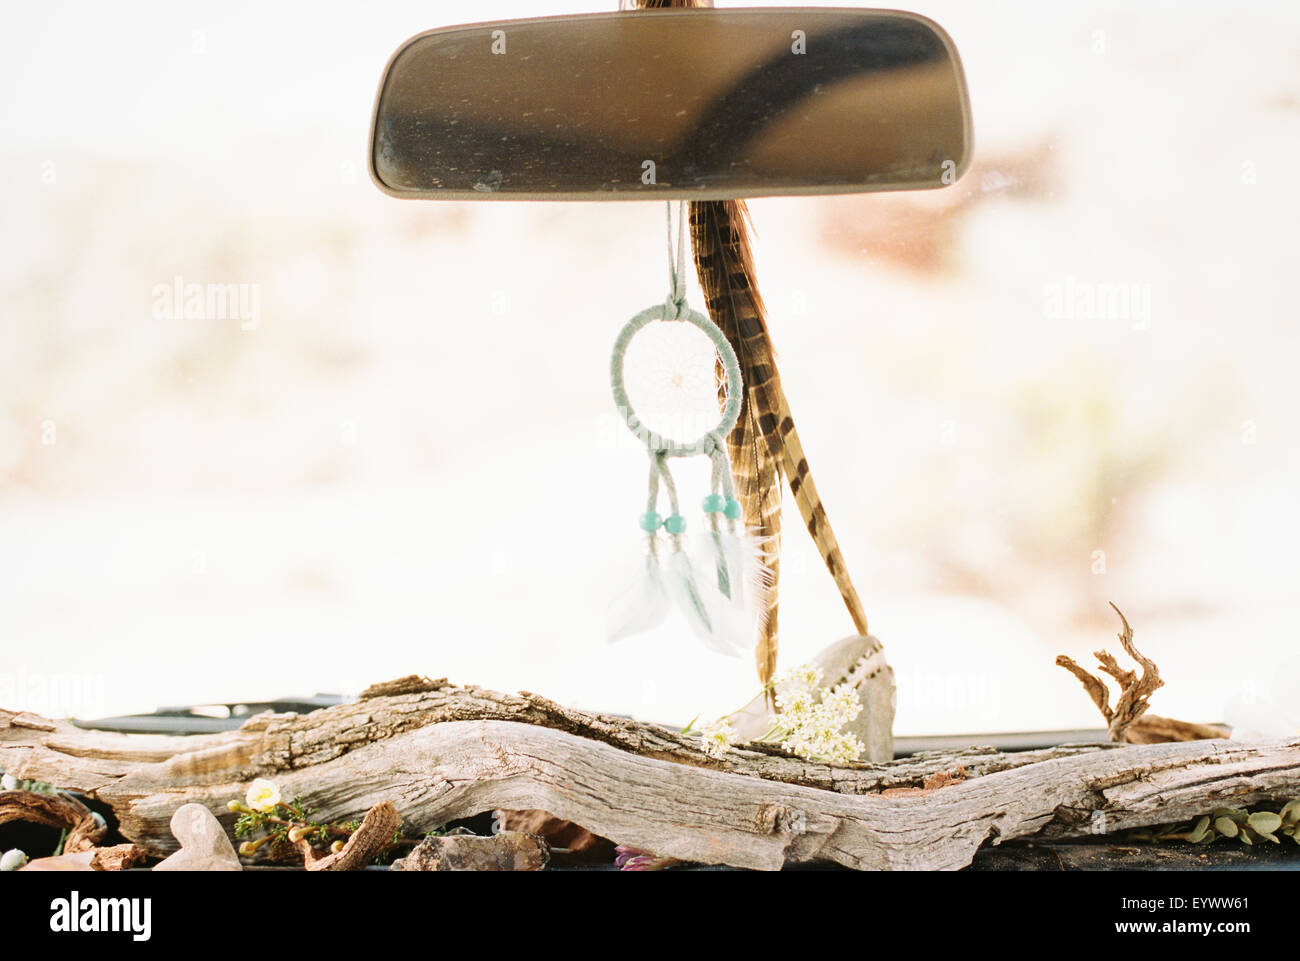 Close up of a car interior, driftwood on the dashboard, a dream catcher and feathers hanging from the rear view mirror. Stock Photo